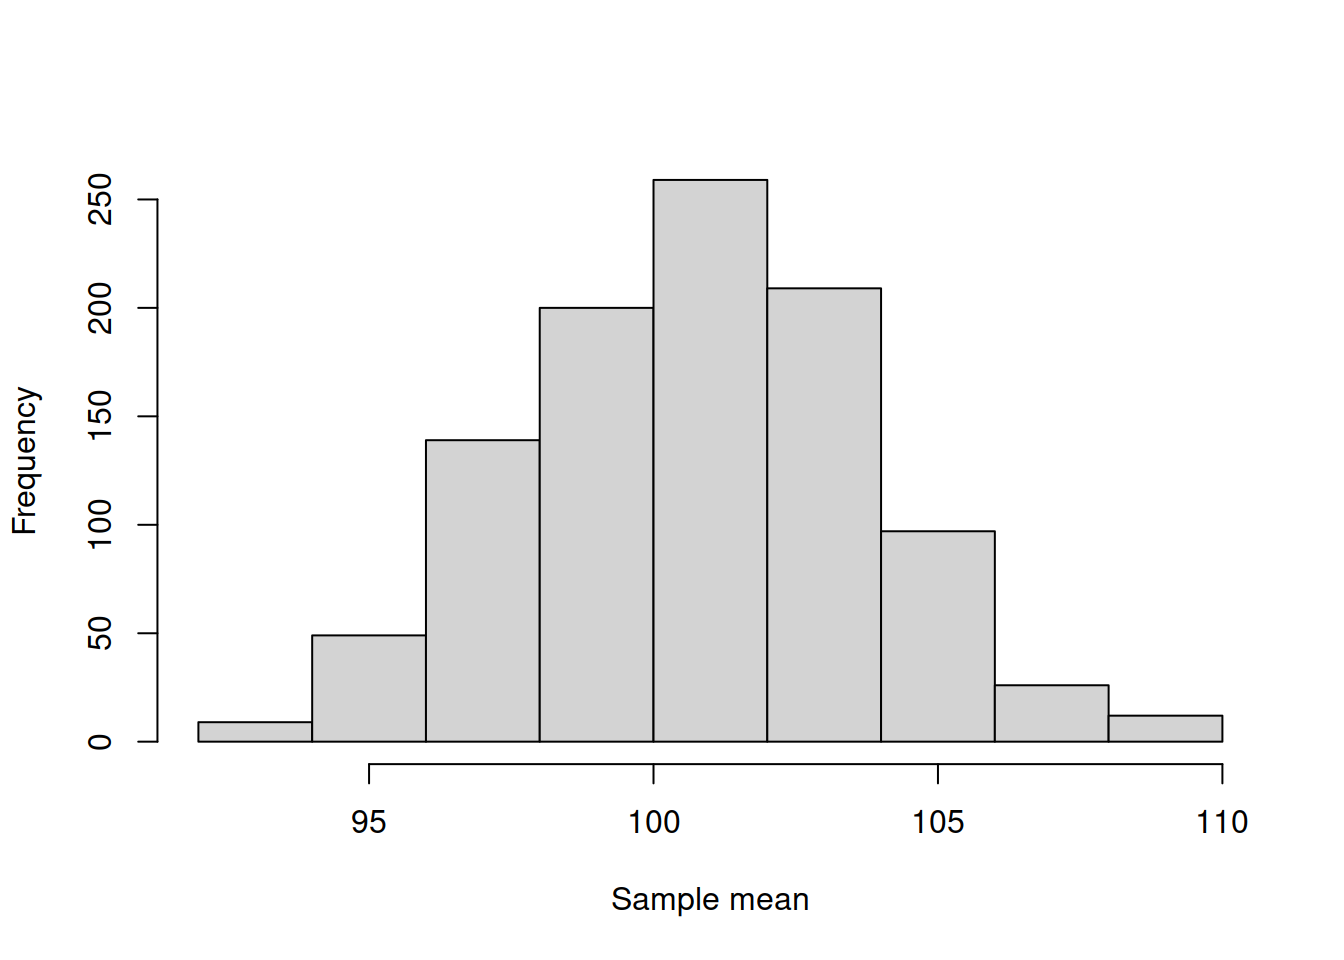 Histogram of the mean of the variable y.